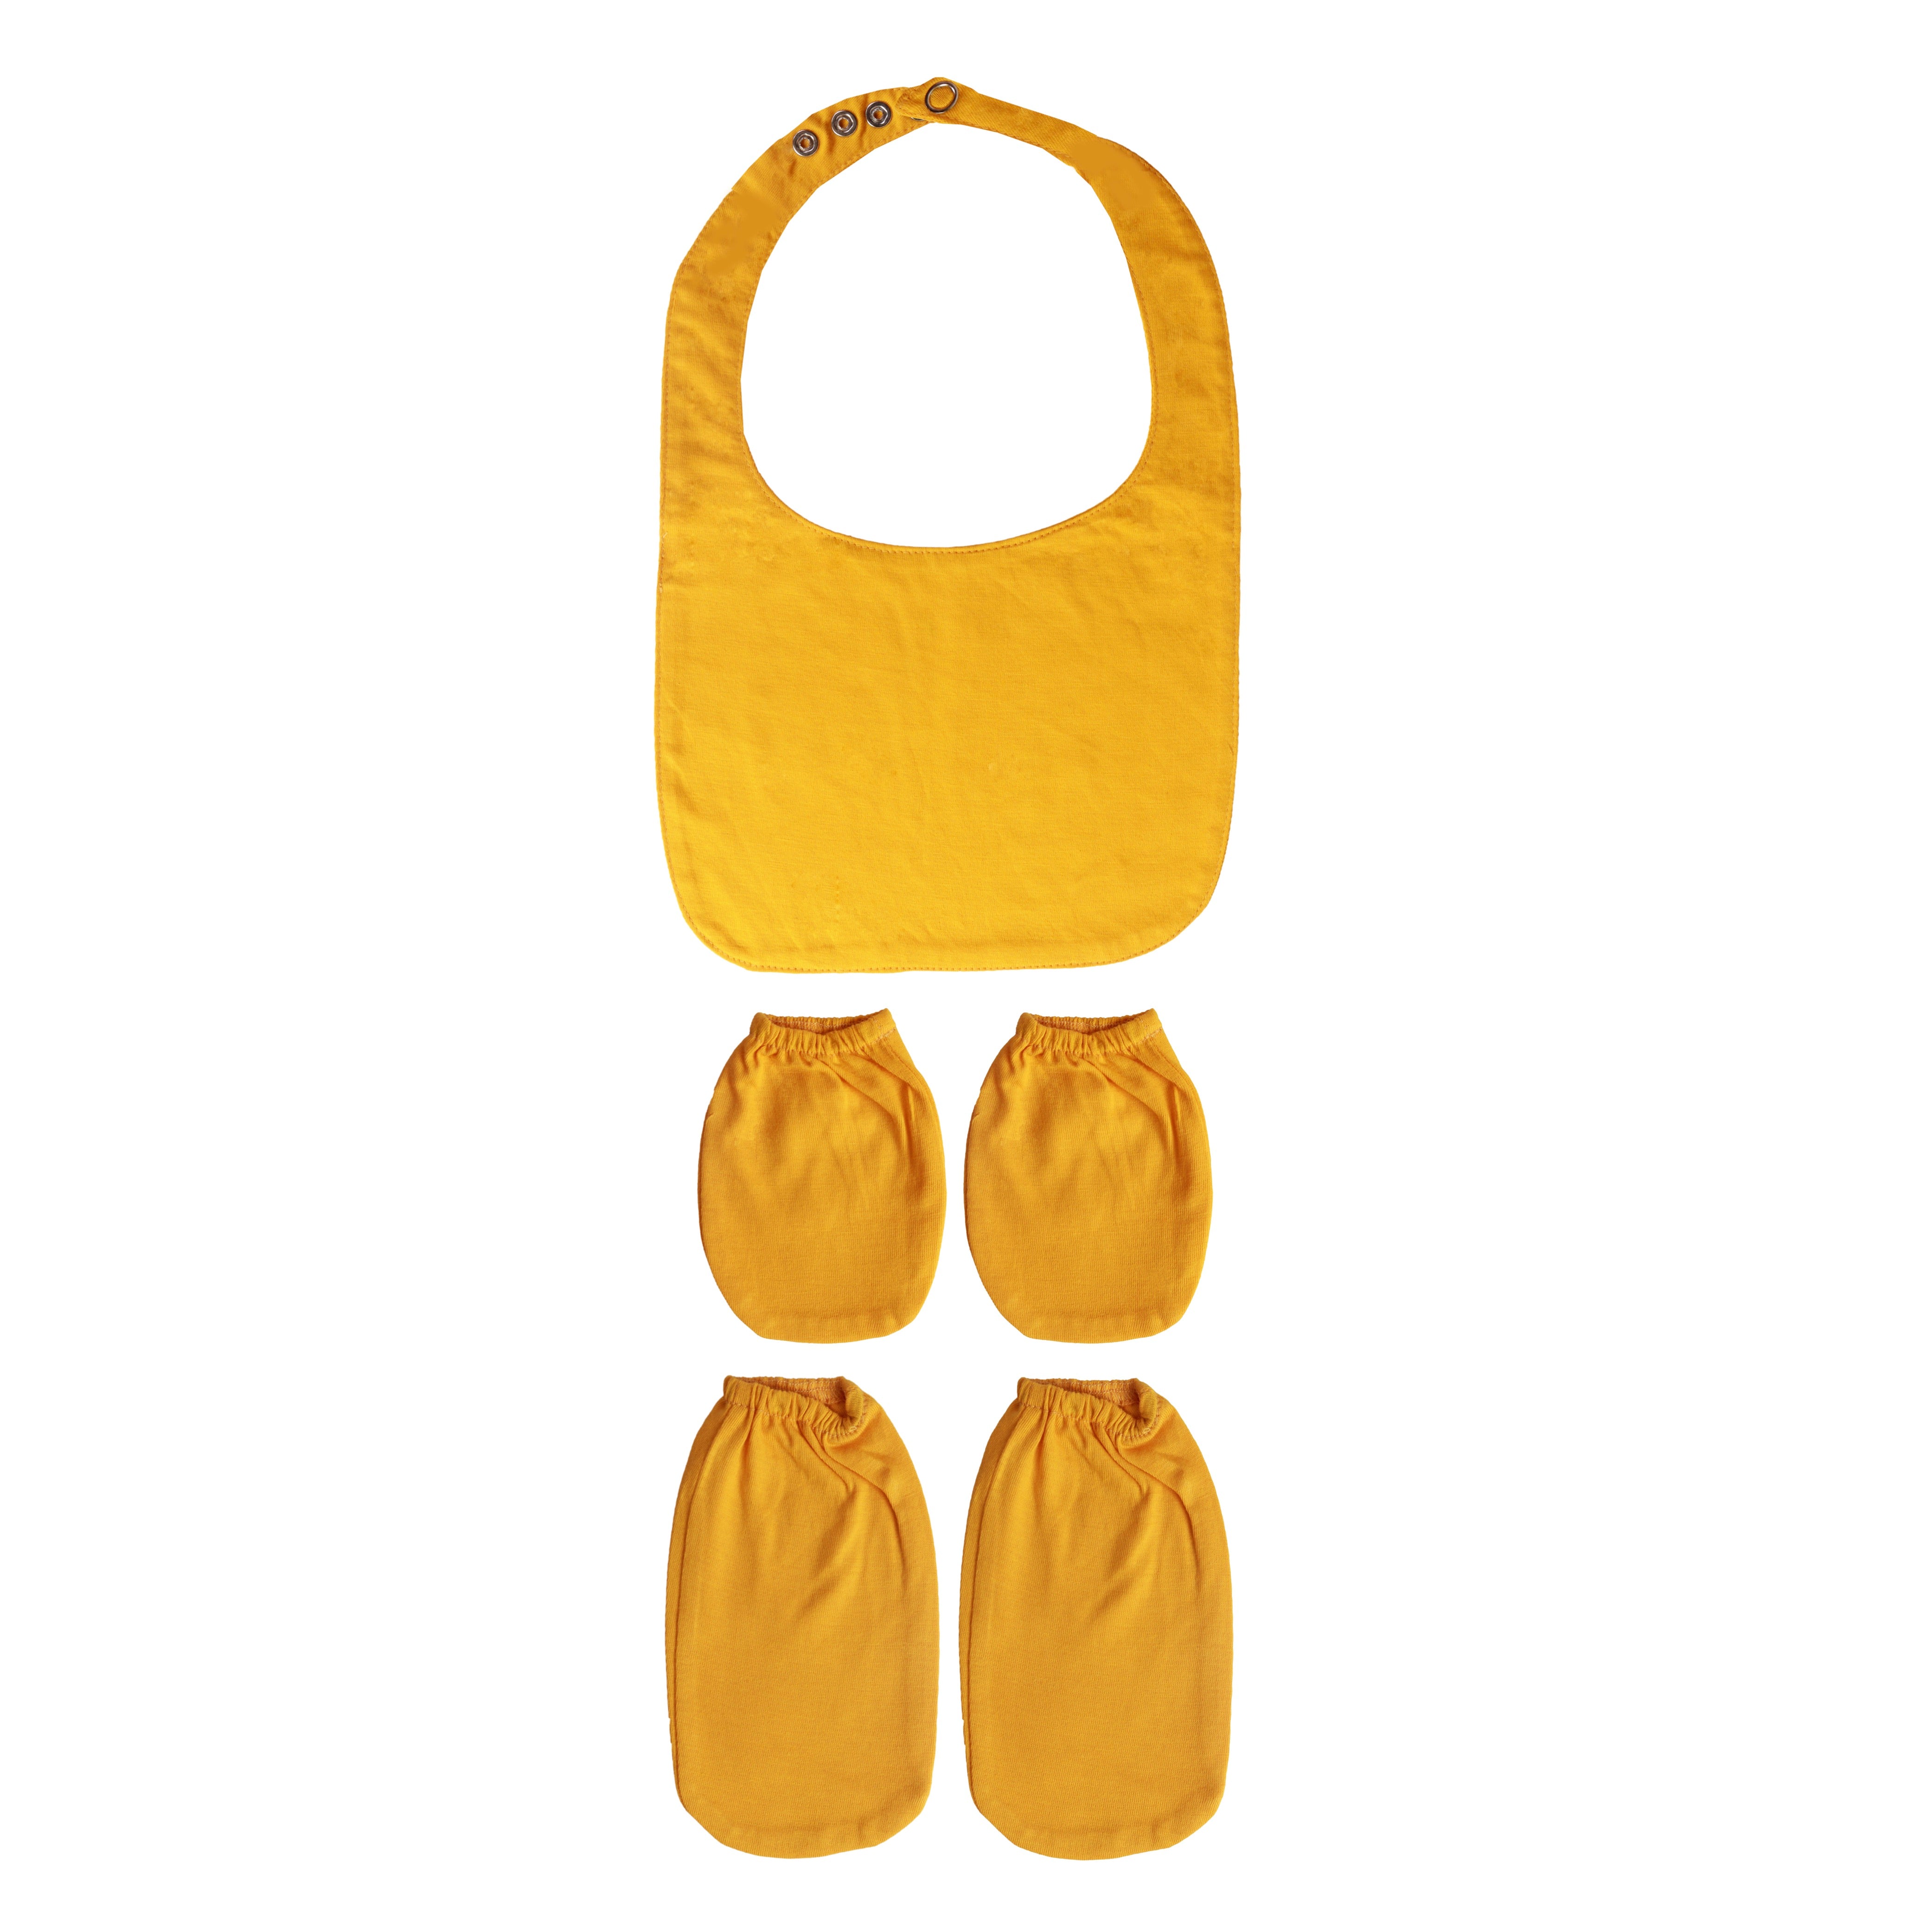 Little By Little 100% Anti Viral, Cotton, Reusable, Anti bacterial & Water Repellent Baby Bibs, Booties, Mittens - Yellow